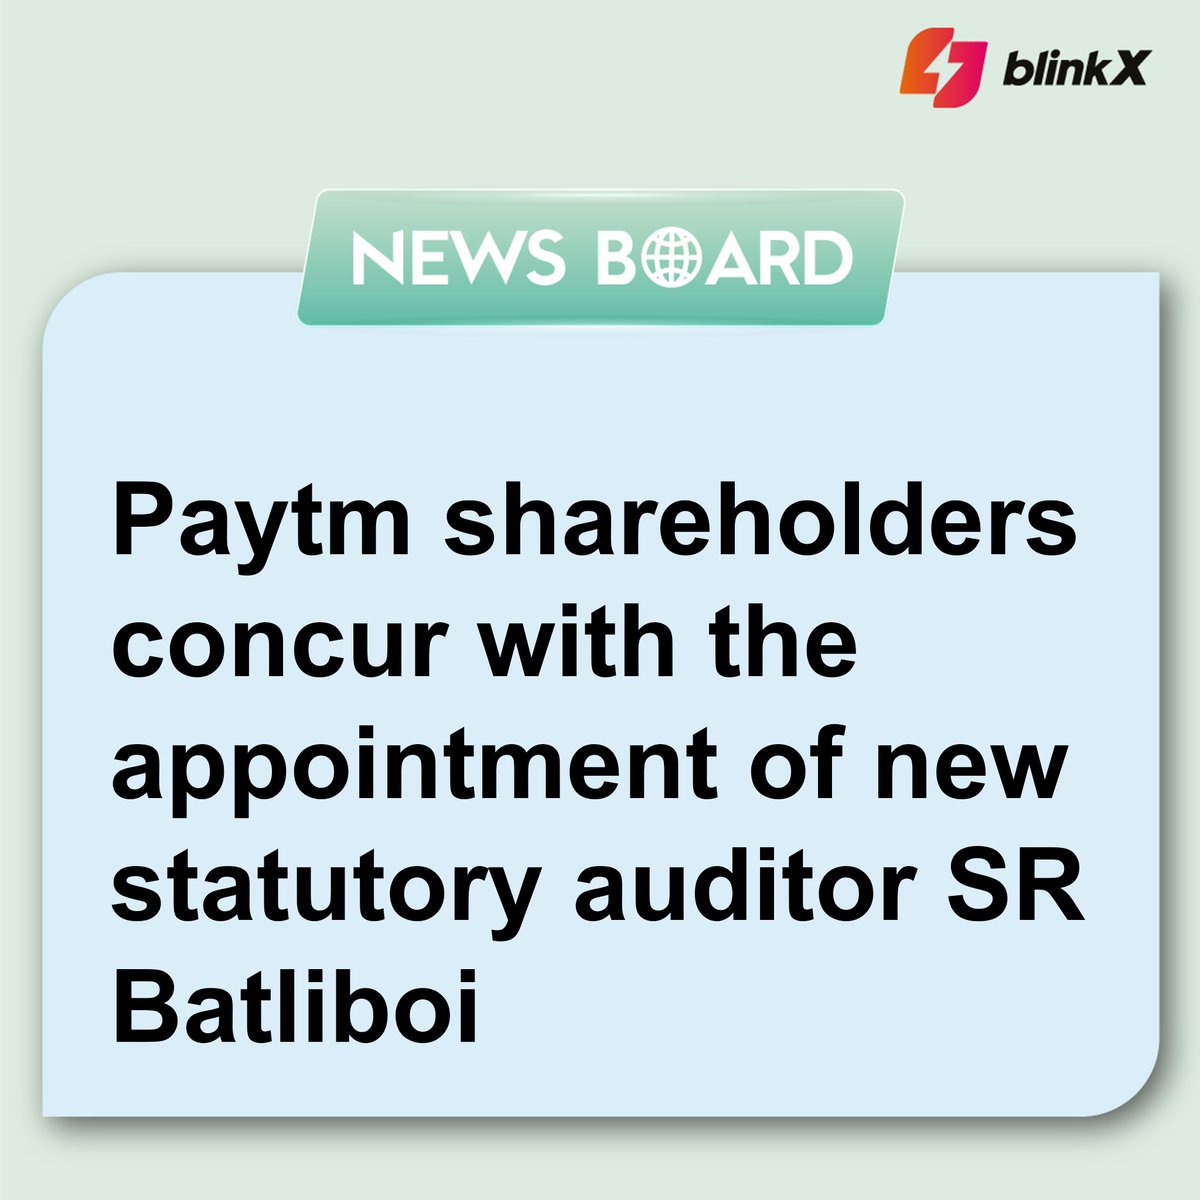 Shareholders had approved the nomination of S.R. Batliboi & Associates LLP as a new statutory auditor

Read more at - blinkx.in/news/company/p…

#Shareholders #Paytm #batliboi #auditor #Accounting #Finance #news #businessupdate #blinkX #getblinkX